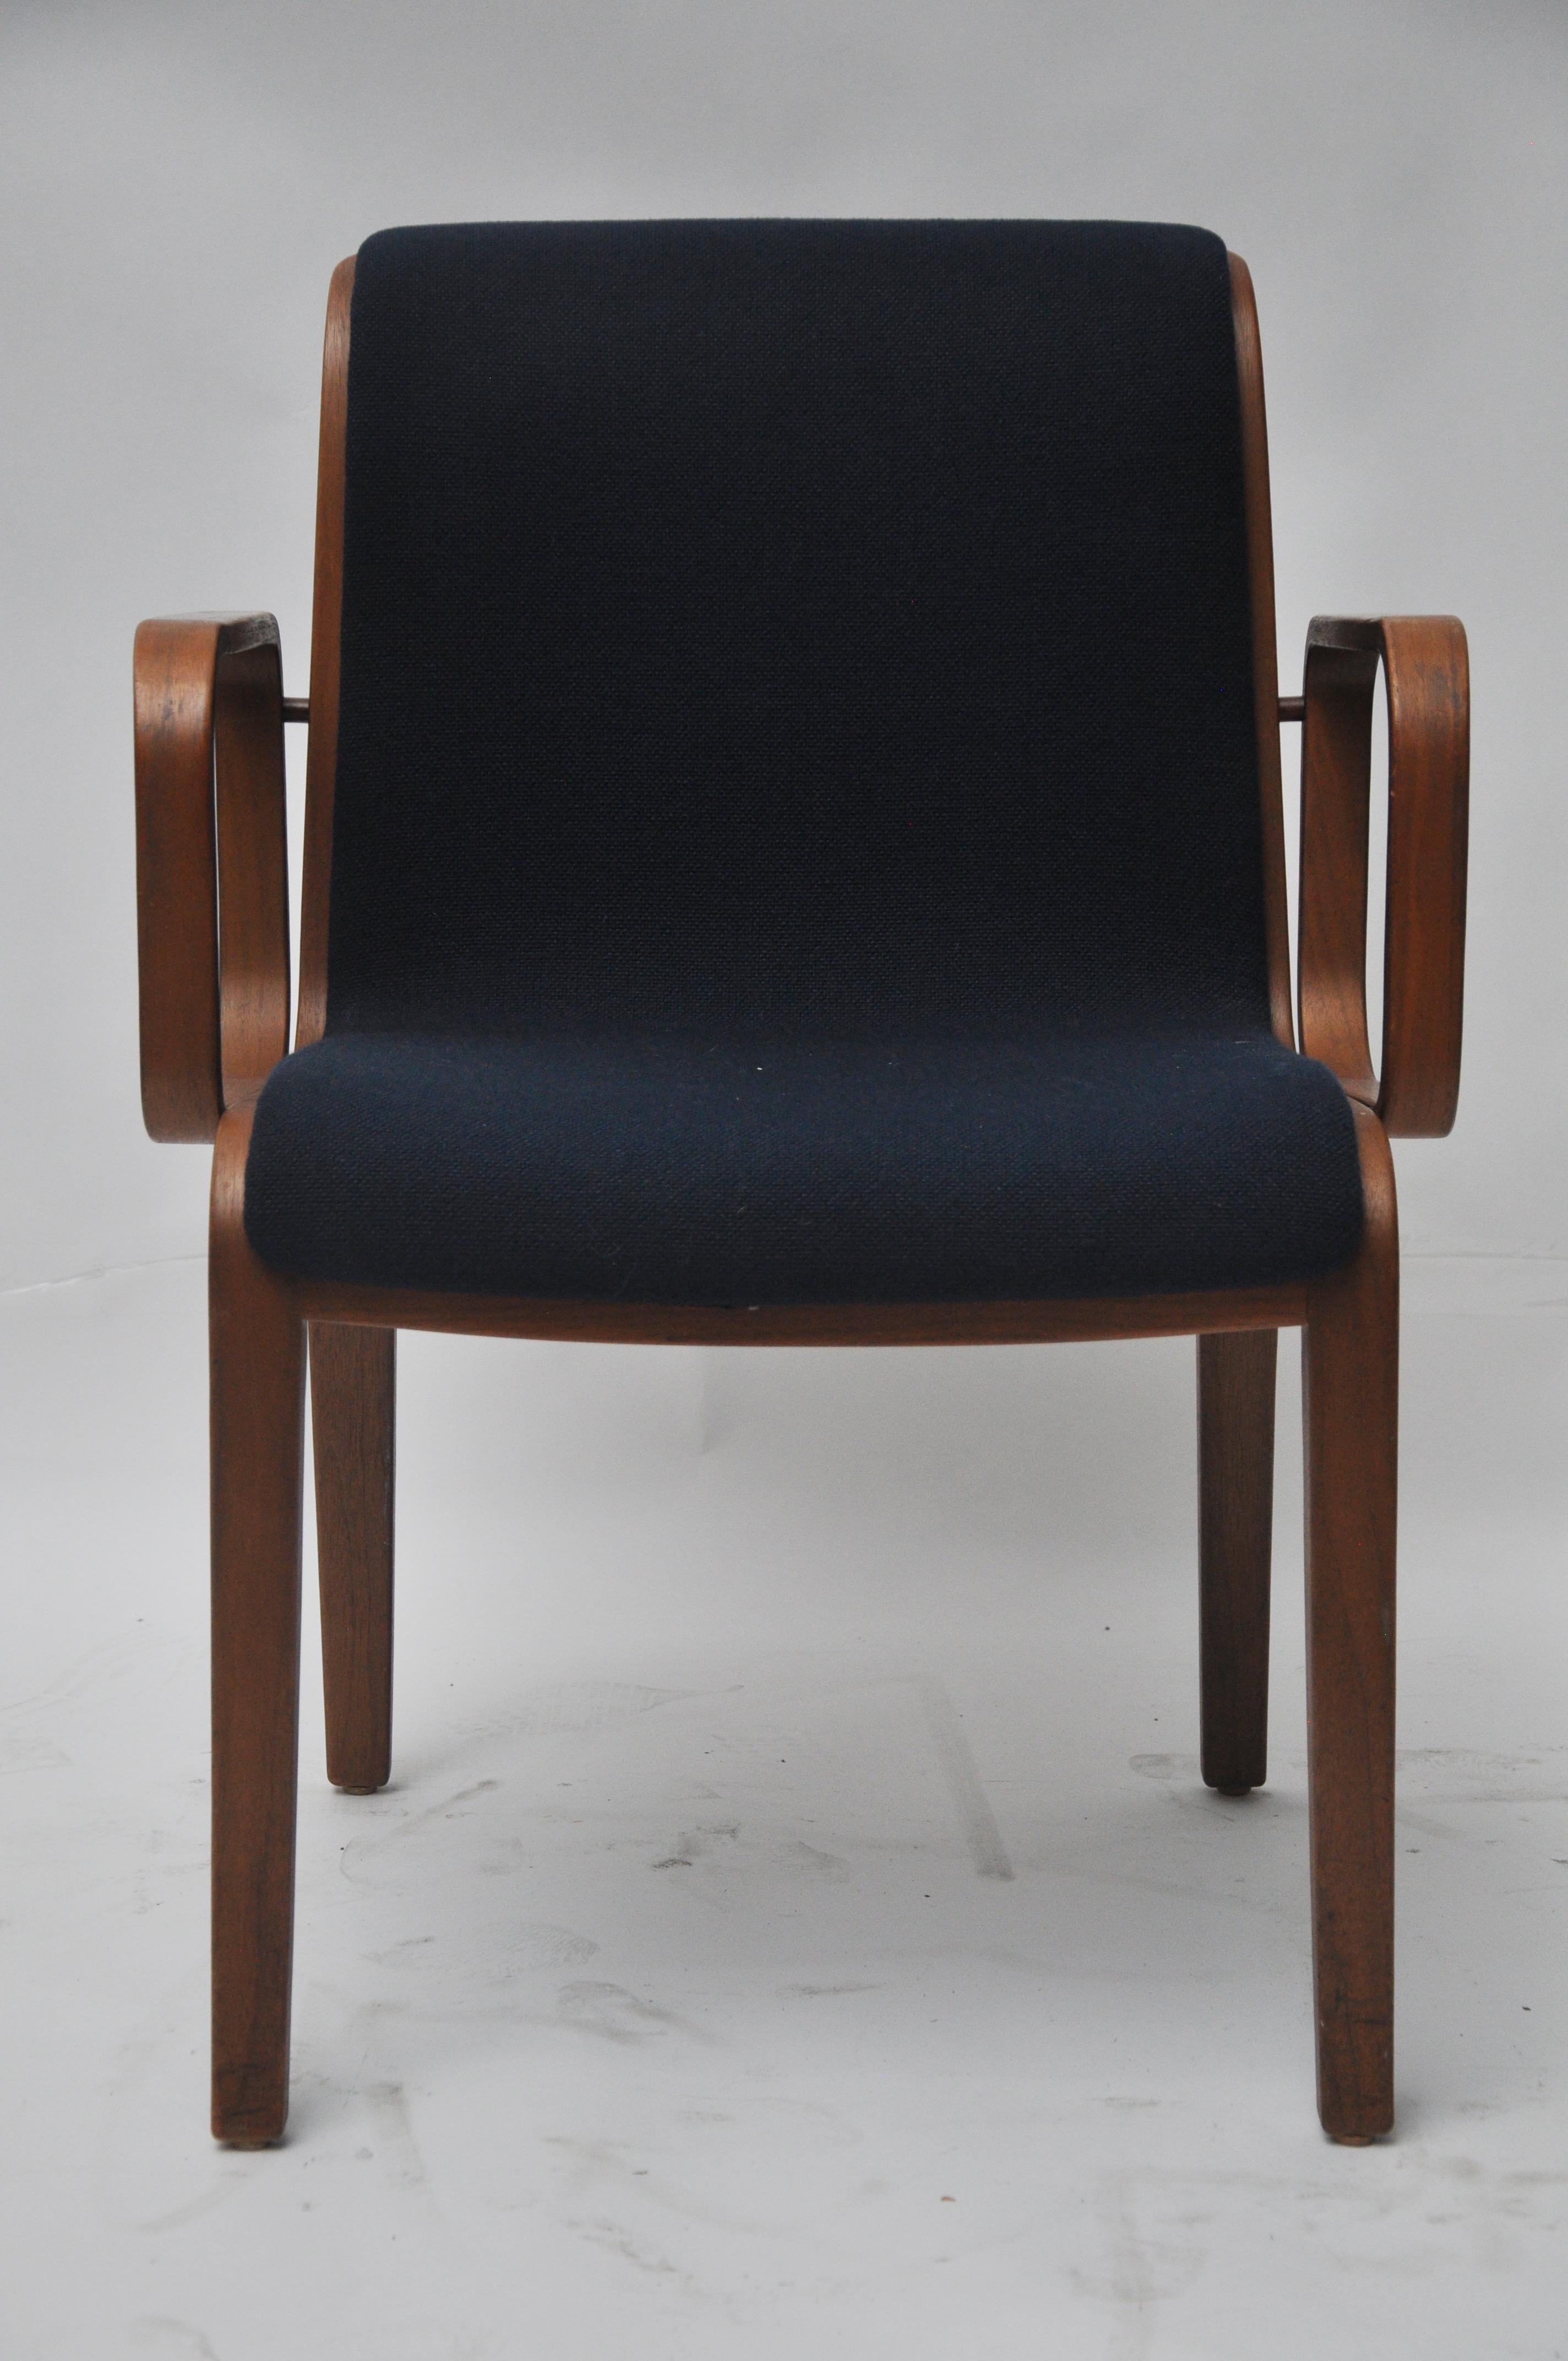 These chairs have a wooden frame and have original navy blue upholstery with no rips or tears. Very comfortable. They would benefit from being cleaned or reupholstered. Measures: Arm height is 26